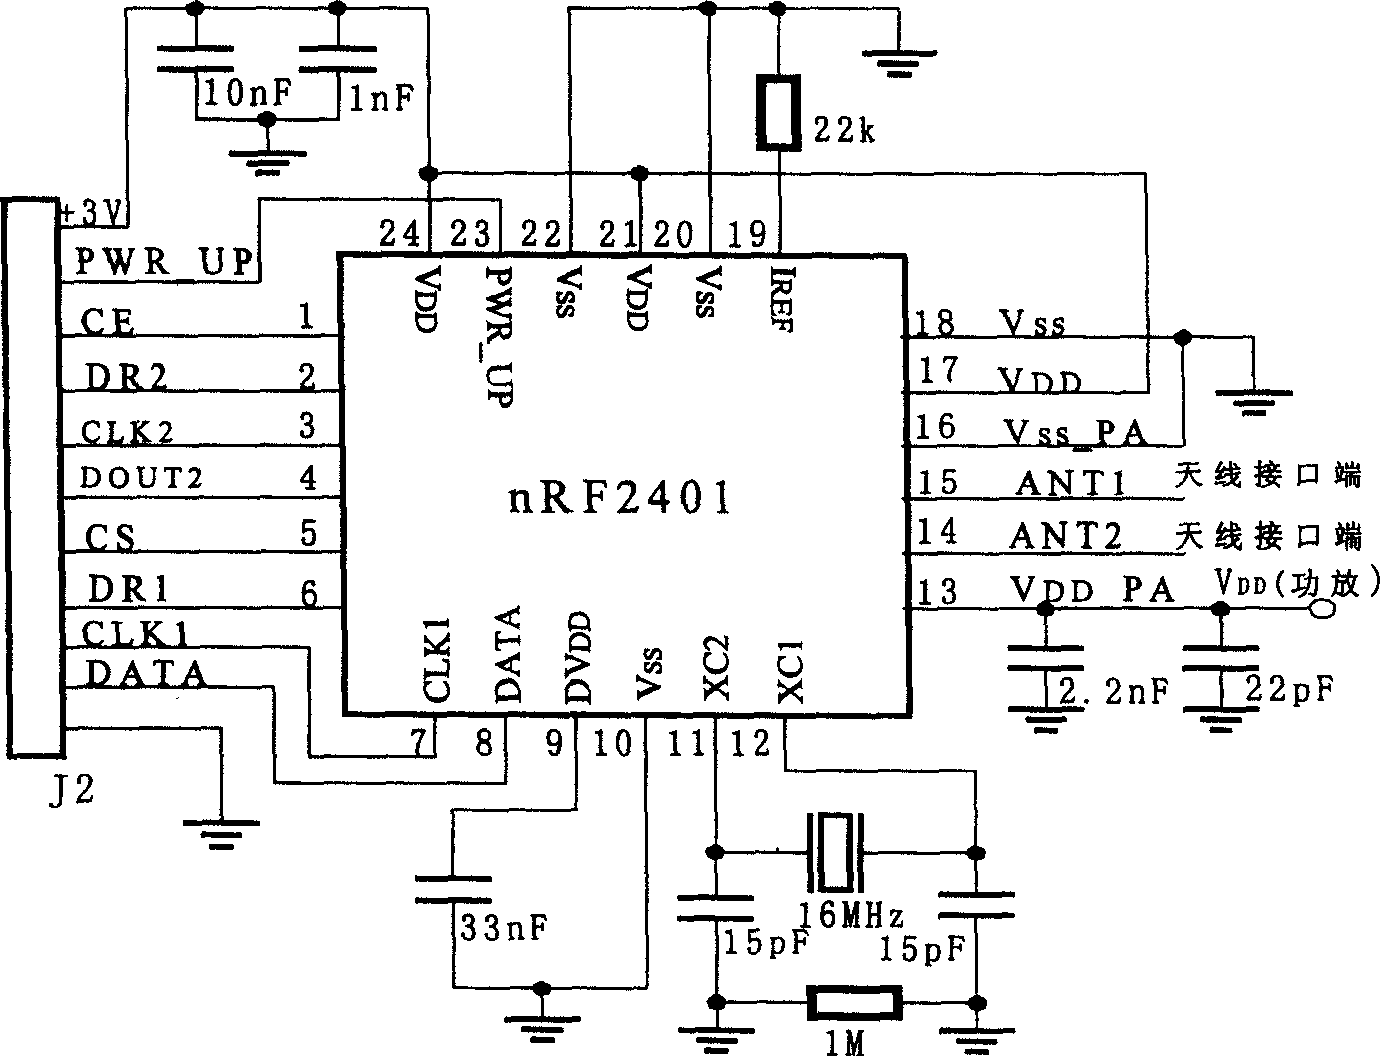 Multi-mode radio data collecting and intelligent mixing system